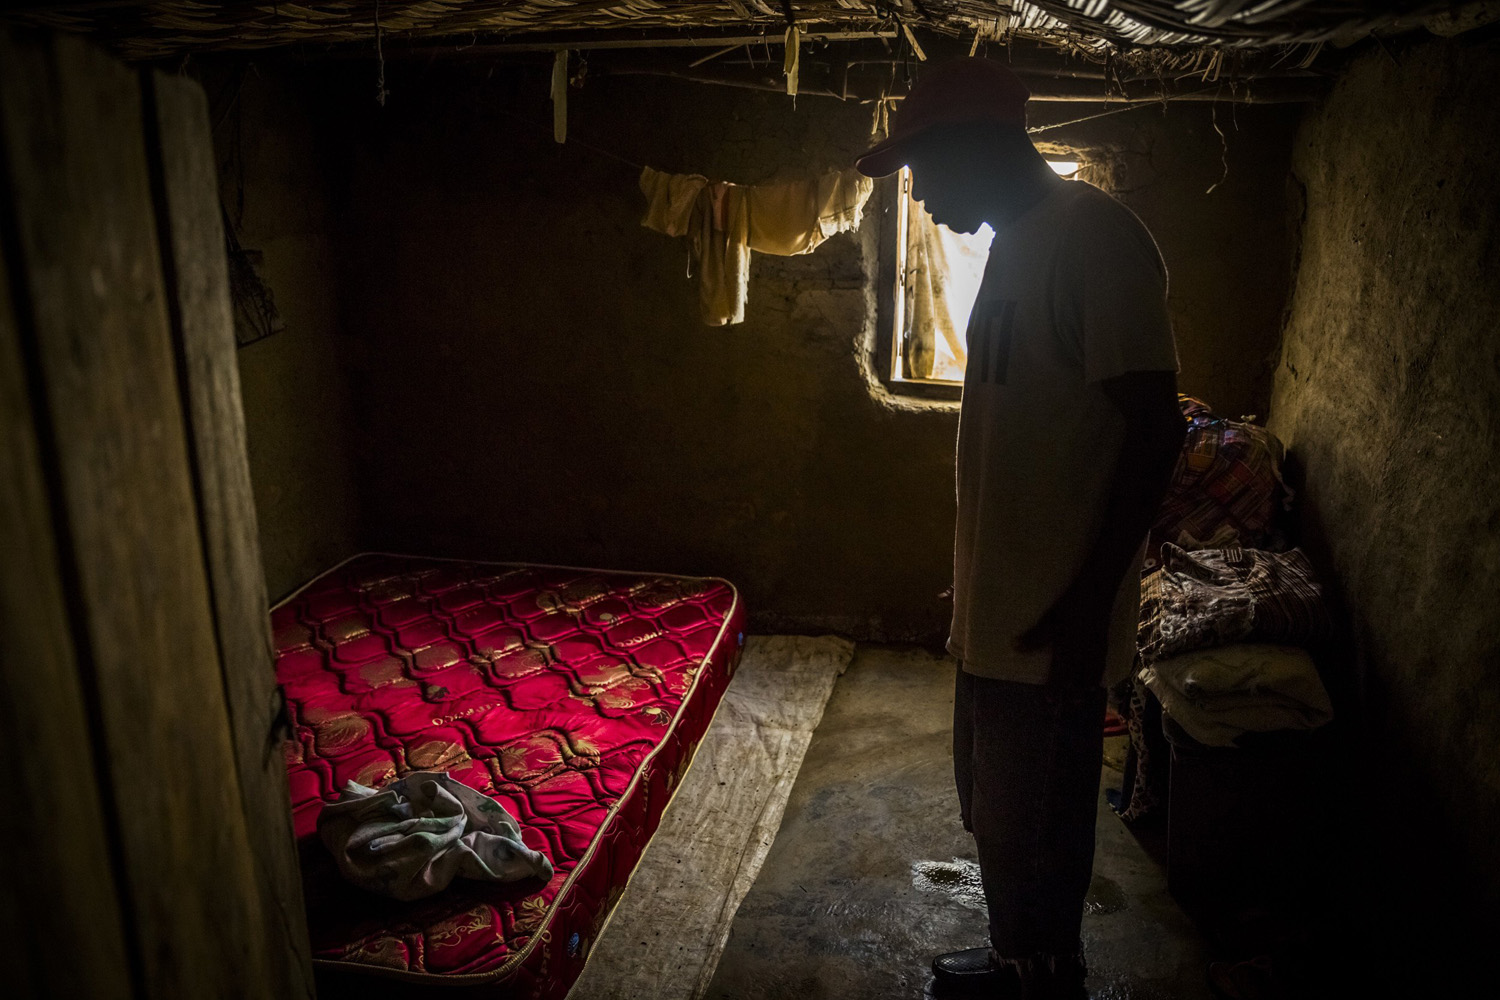 John Yarkpawolo looks over the body of four-day-old Diana Dormeyan, his granddaughter, whose mother died while giving birth to her, at their family home in Gbarnga, Liberia, Oct. 8, 2014.